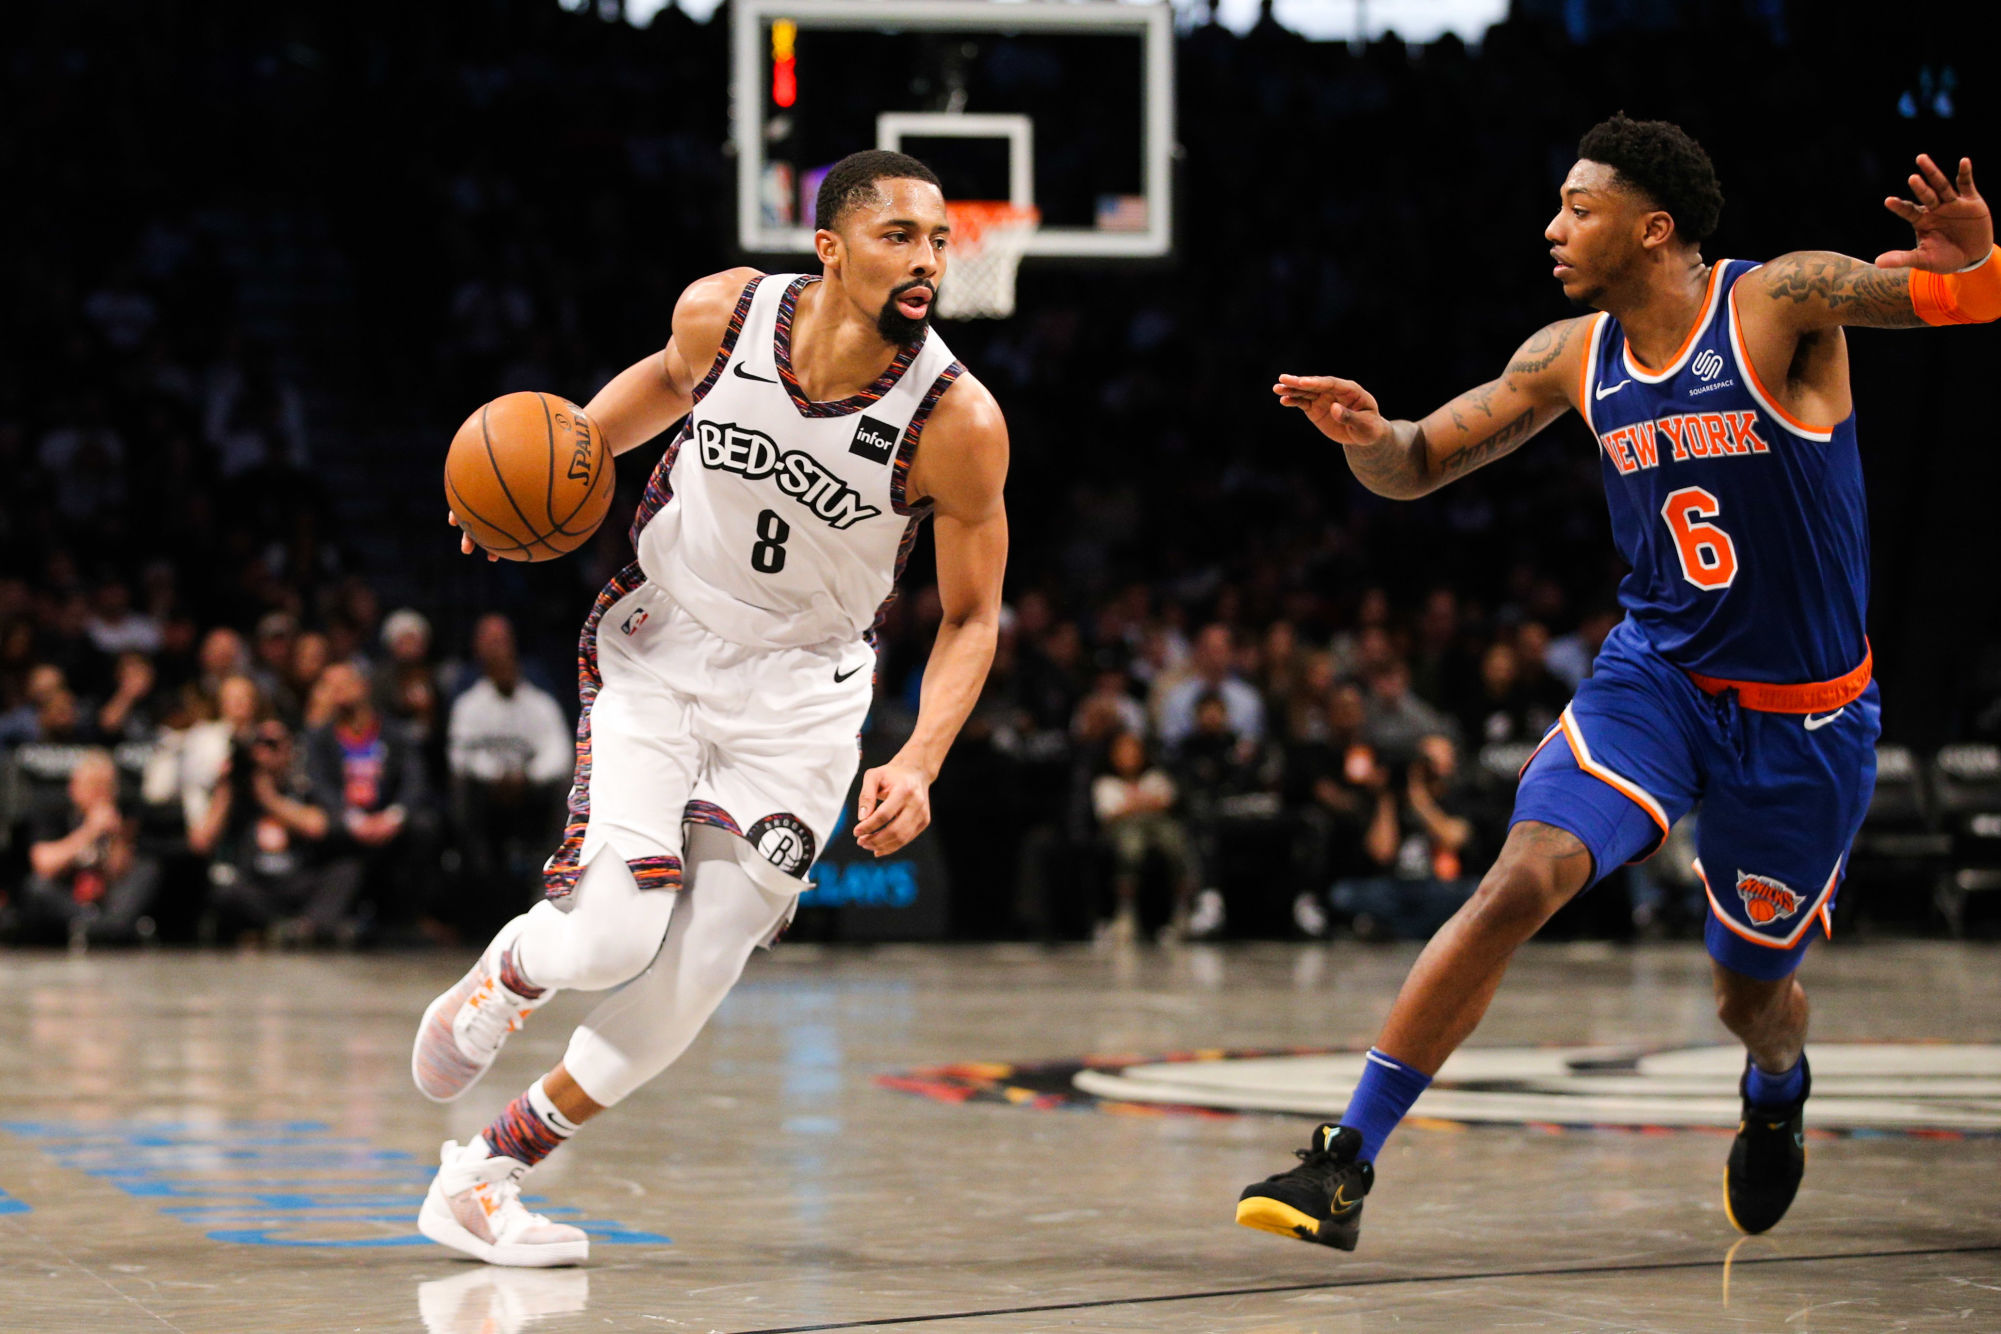 Dec 26, 2019; Brooklyn, New York, USA; Brooklyn Nets point guard Spencer Dinwiddie (8) drives the ball against New York Knicks point guard Elfrid Payton (6) during the third quarter at Barclays Center. Mandatory Credit: Brad Penner-USA TODAY Sports/Sipa USA 

Photo by Icon Sport - Spencer DINWIDDIE - Elfrid PAYTON - Barclays Center - Brooklyn (Etats Unis)